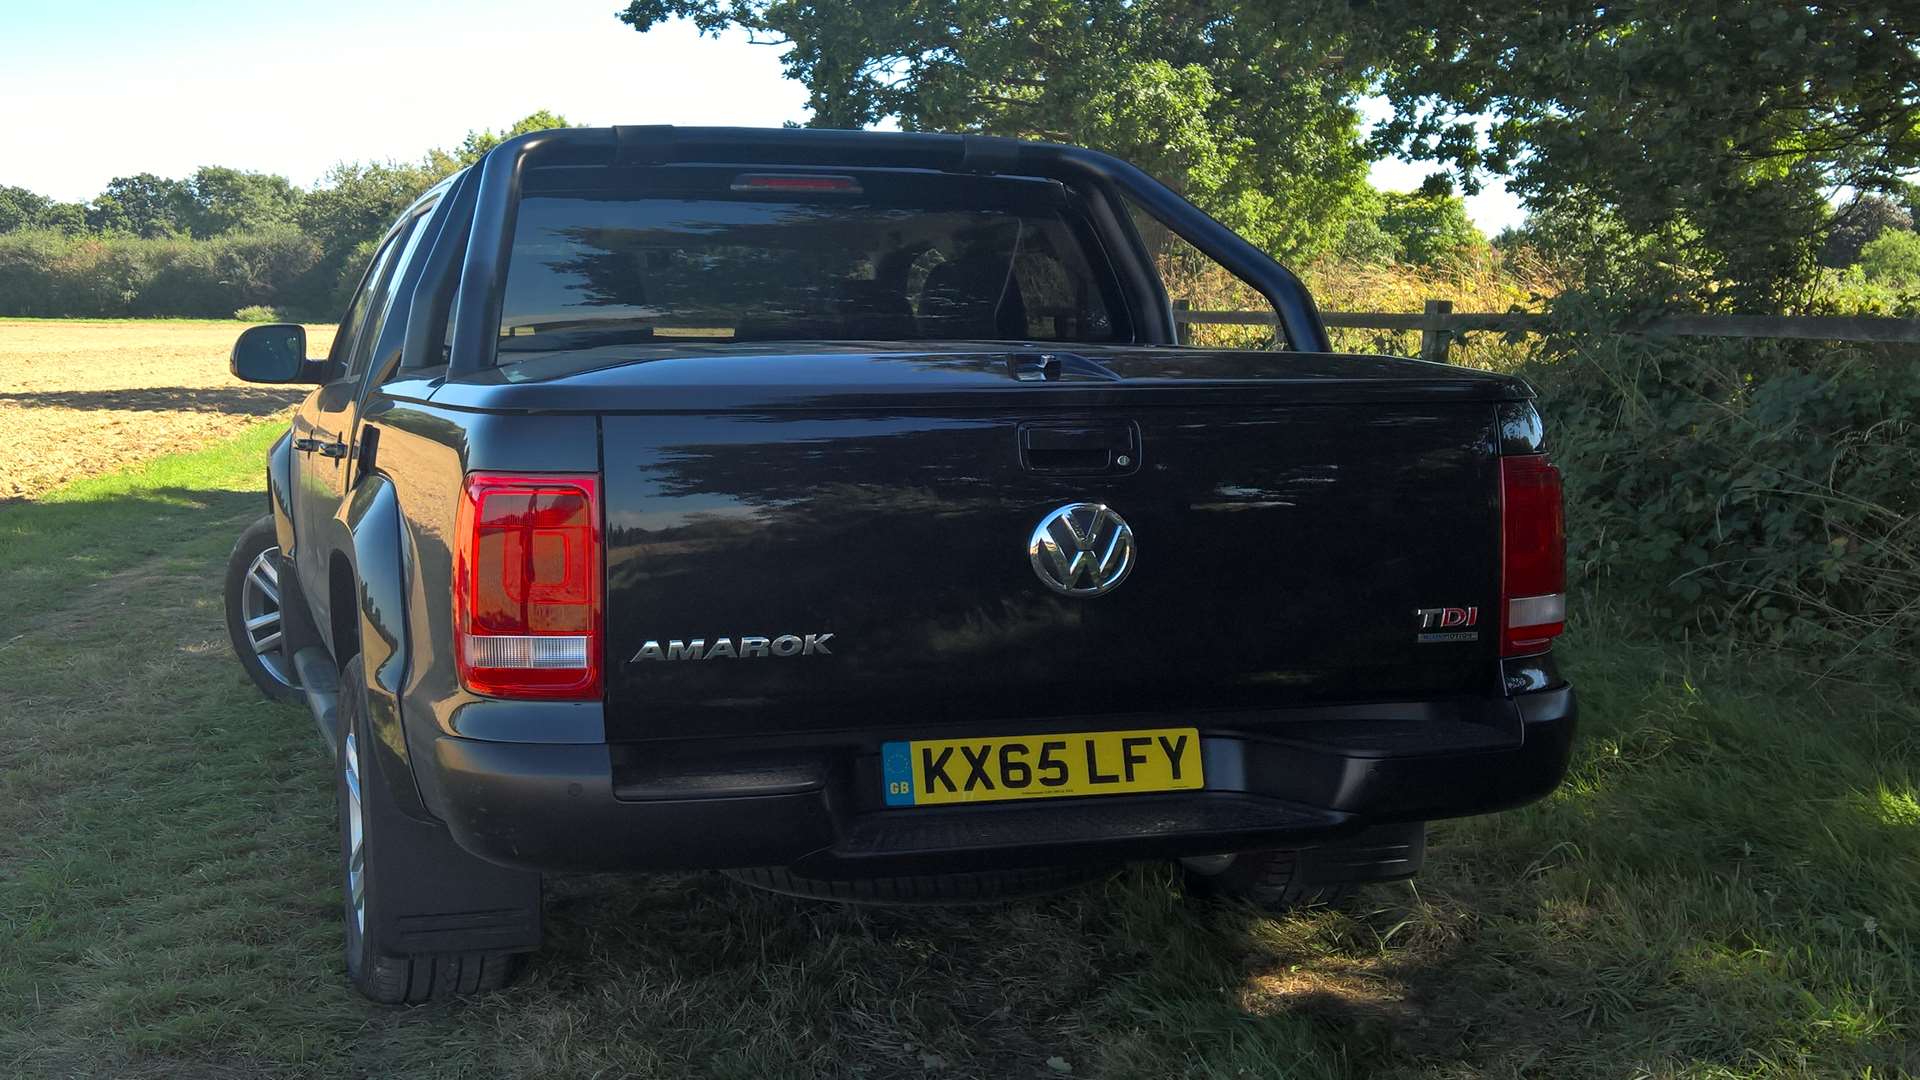 The Amarok is a wide car which creates a large load area